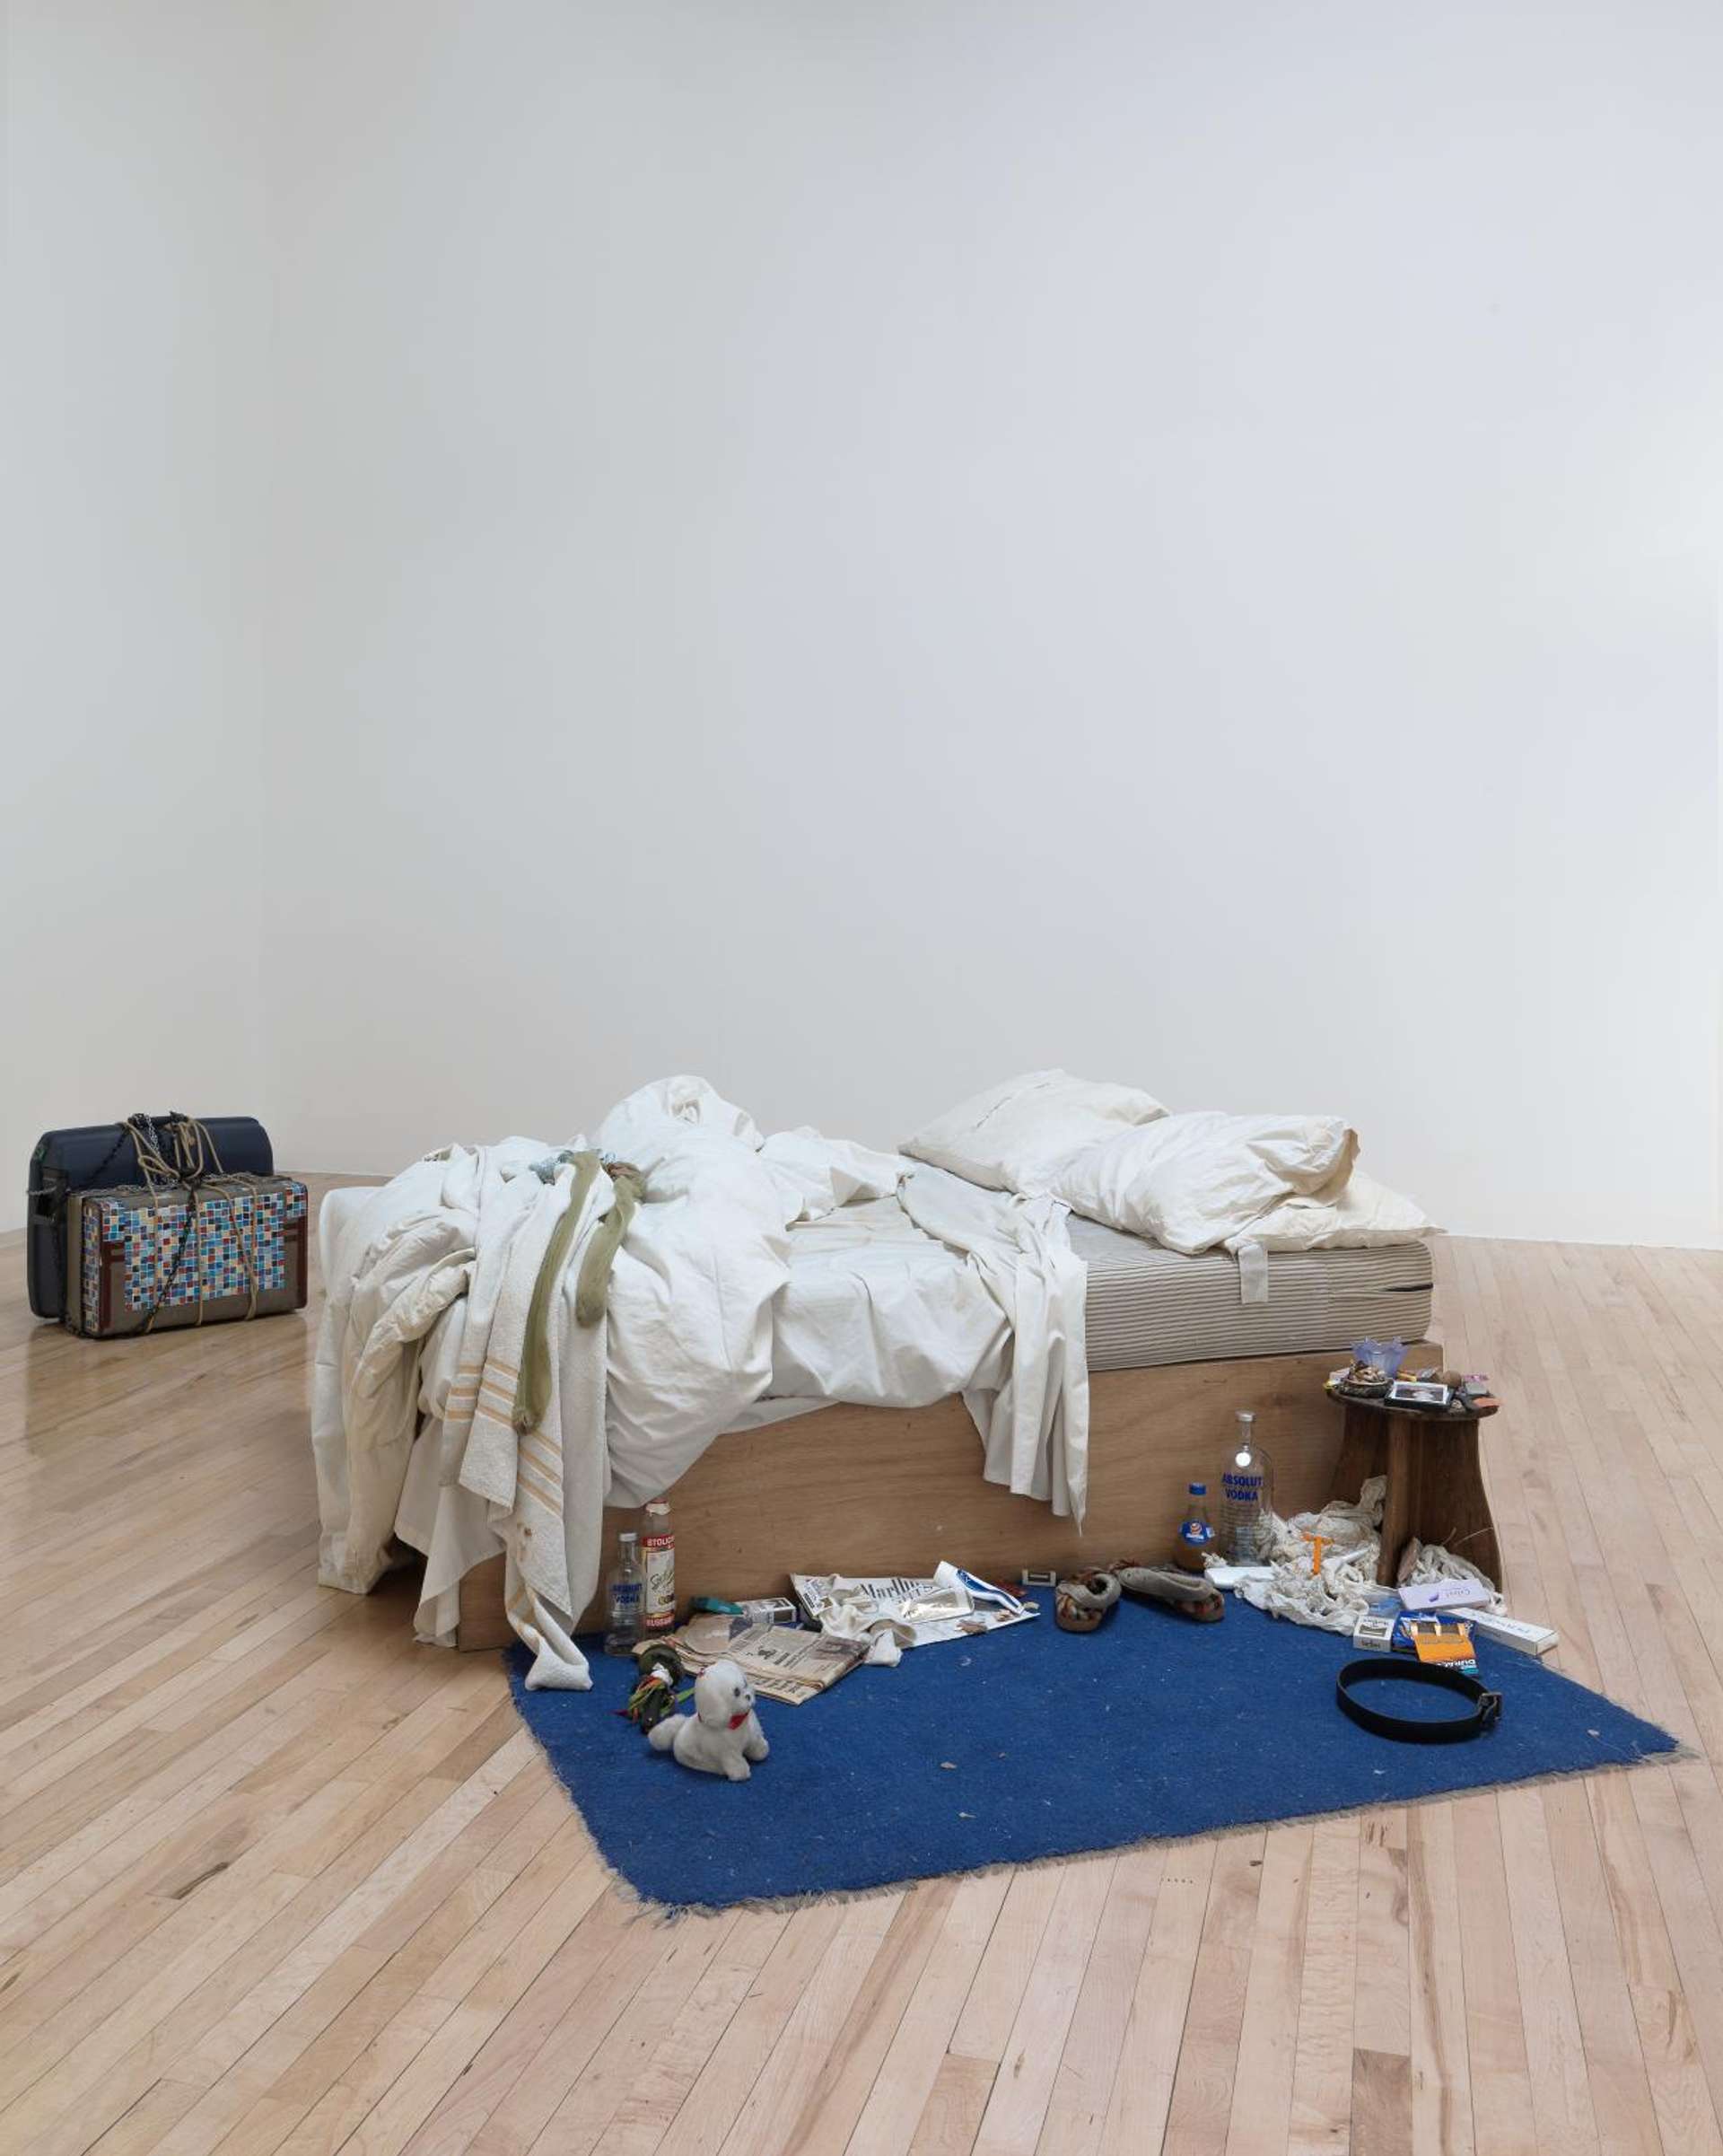 A photograph of My Bed (1998), an installation work by artist Tracey Emin. It shows a dishevelled bed, surrounded by empty alcohol bottles, cigarette butts and used condoms.